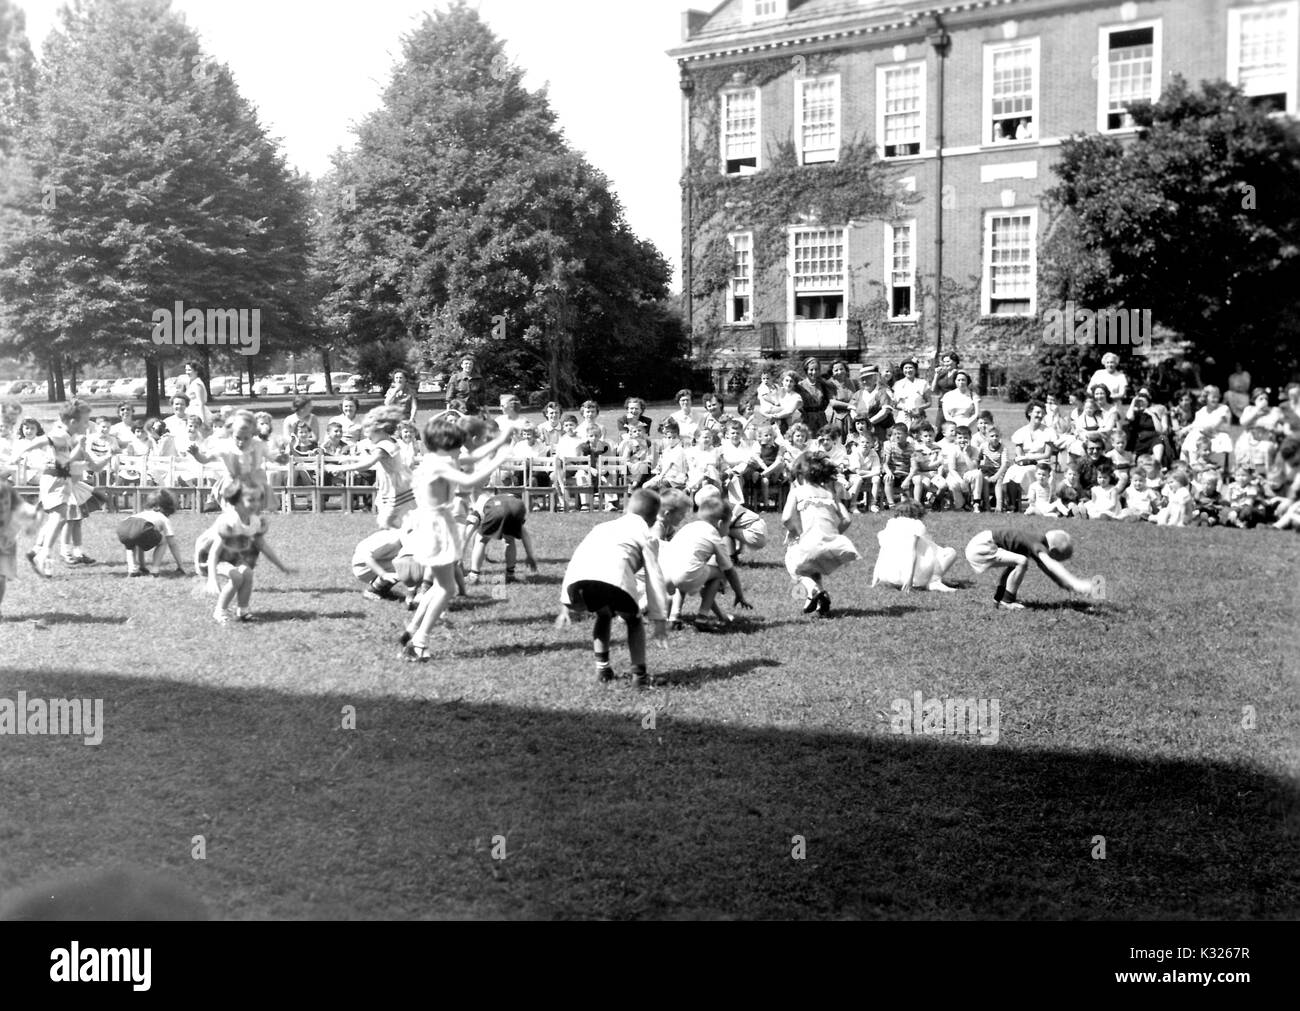 At the end of the school year for a demonstration school at Johns Hopkins University, young boys and girls put on a show in the grass on a sunny day, dancing and squatting down in front of an audience made up of classmates, teachers, and parents standing and sitting outside of an ivy-covered campus building, Baltimore, Maryland, July, 1950. Stock Photo